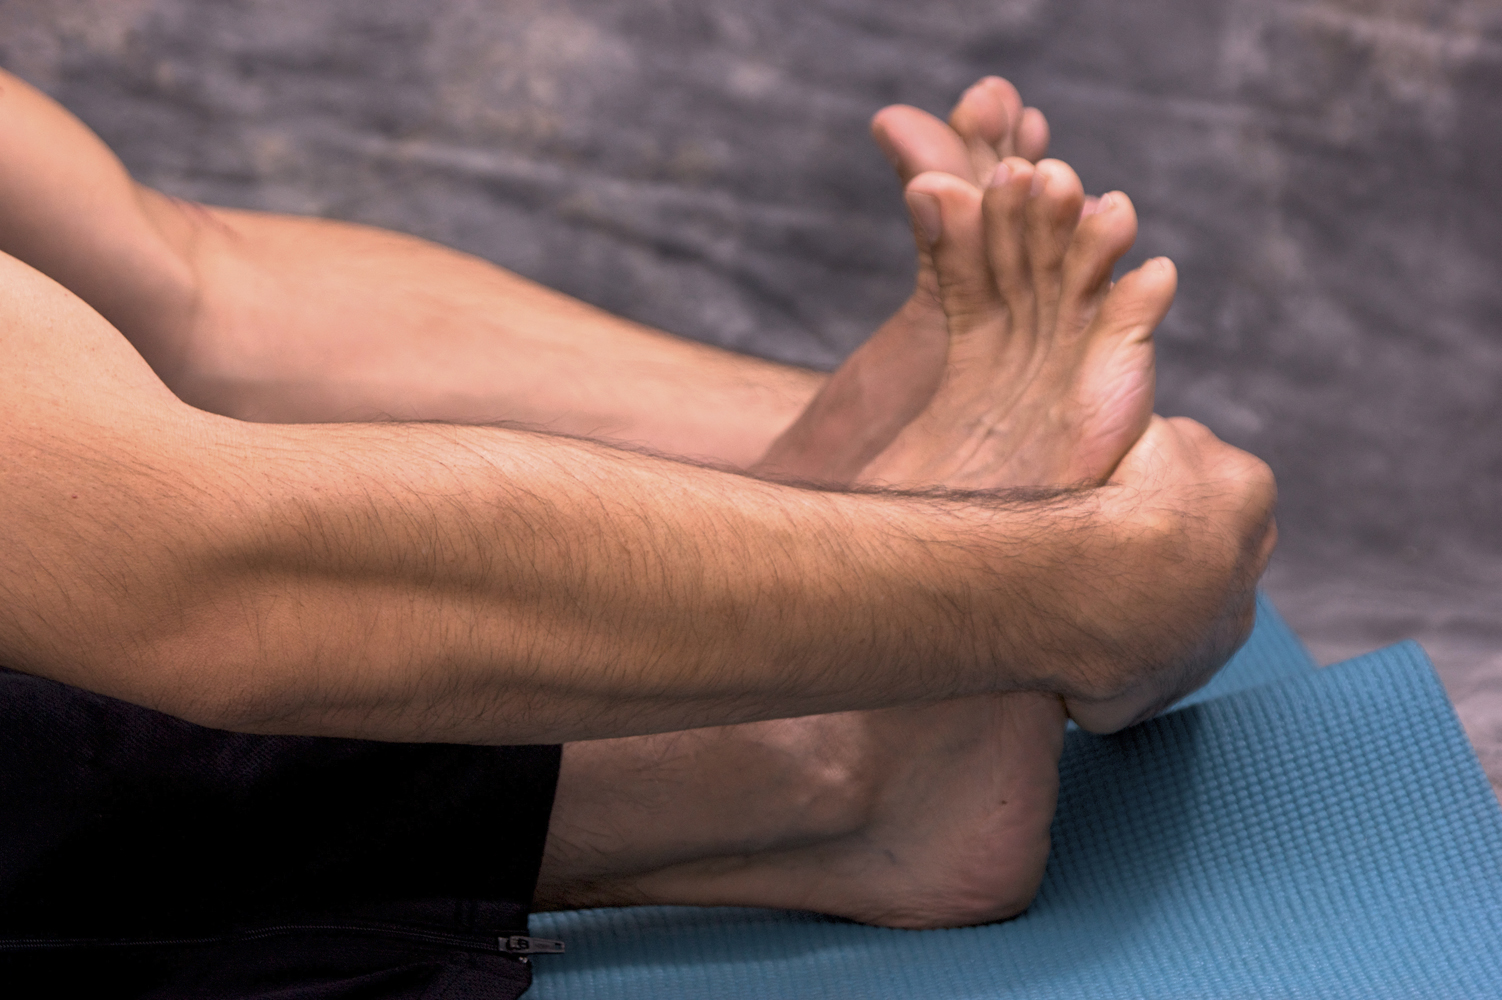 Stretches and Exercises for Foot Pain, Plantar Fasciitis